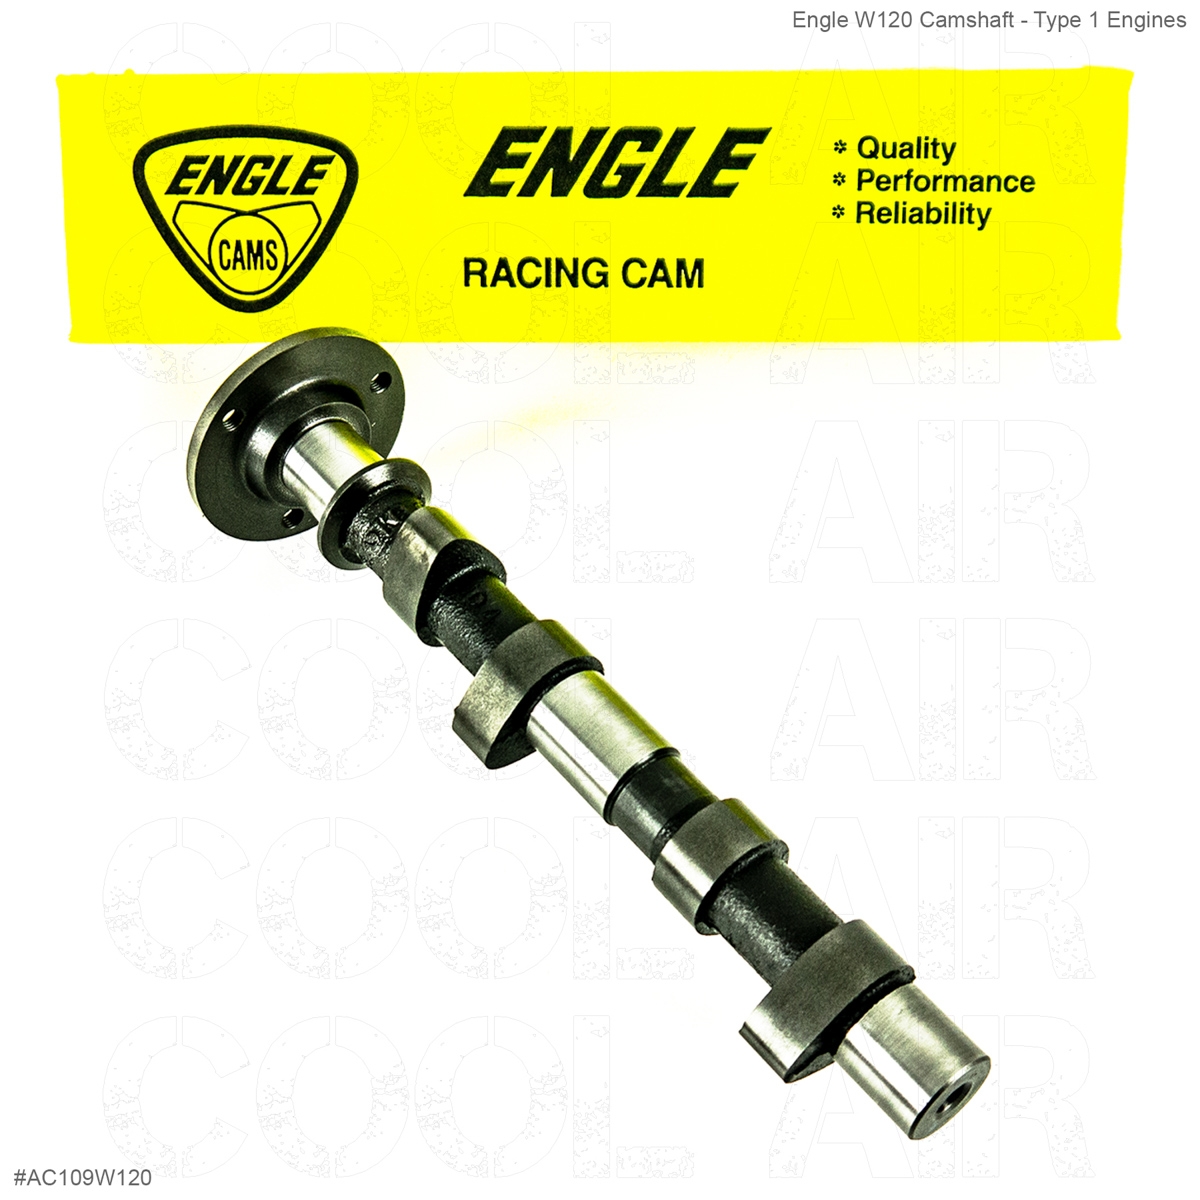 Engle W120 Stage 1 Camshaft Kit With Lifters .397 Gross Lift Clearanced For Stroker Crankshaft